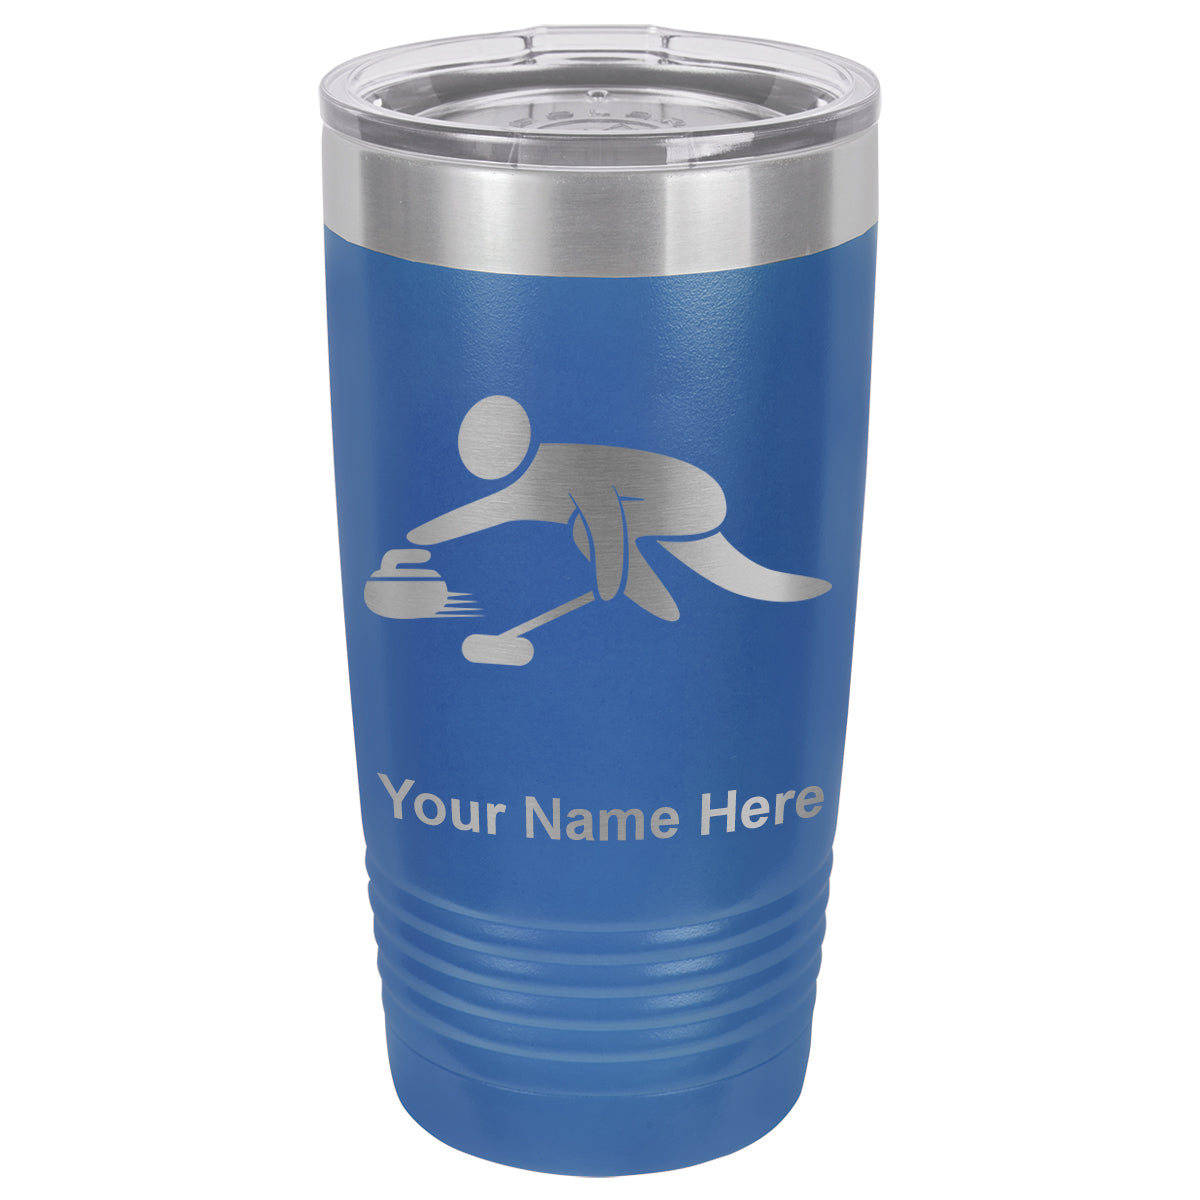 20oz Vacuum Insulated Tumbler Mug, Curling Figure, Personalized Engraving Included